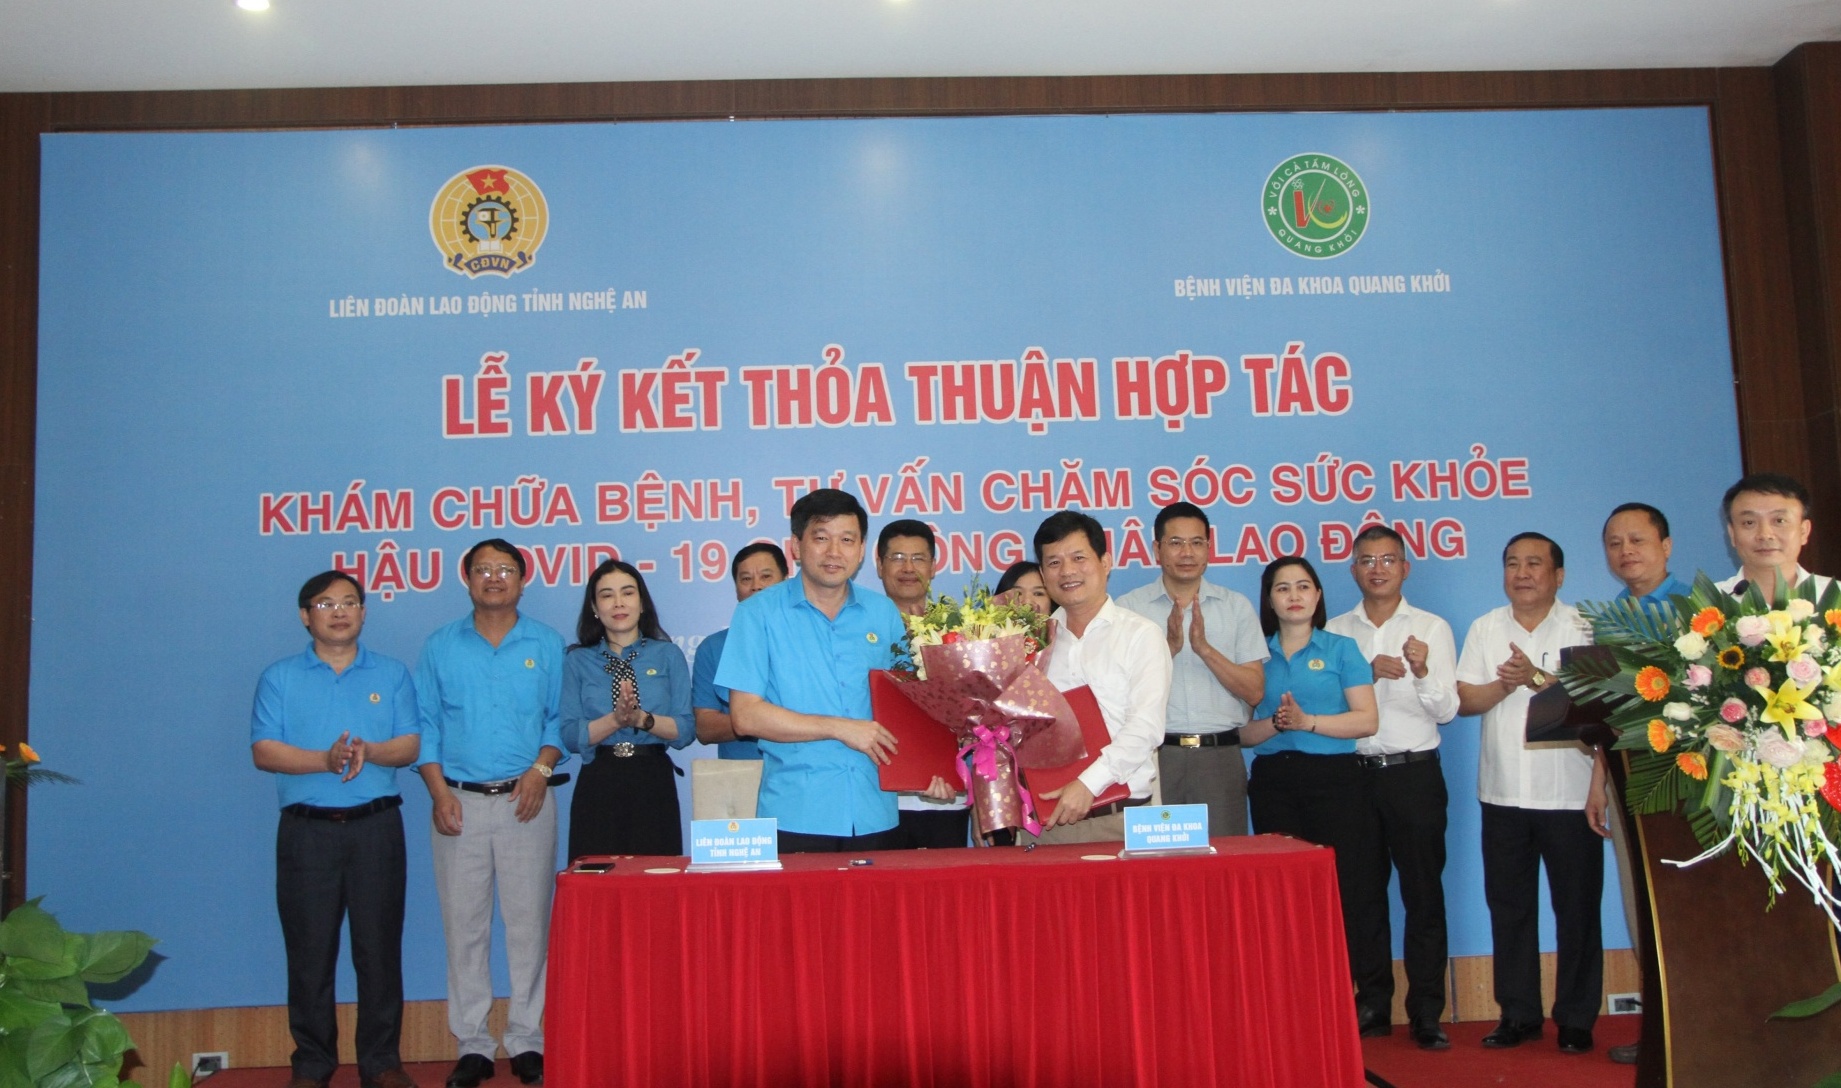 Quang Khoi Hospital and Nghe An Labour Federation cooperate in post-Covid-19 healthcare consultation